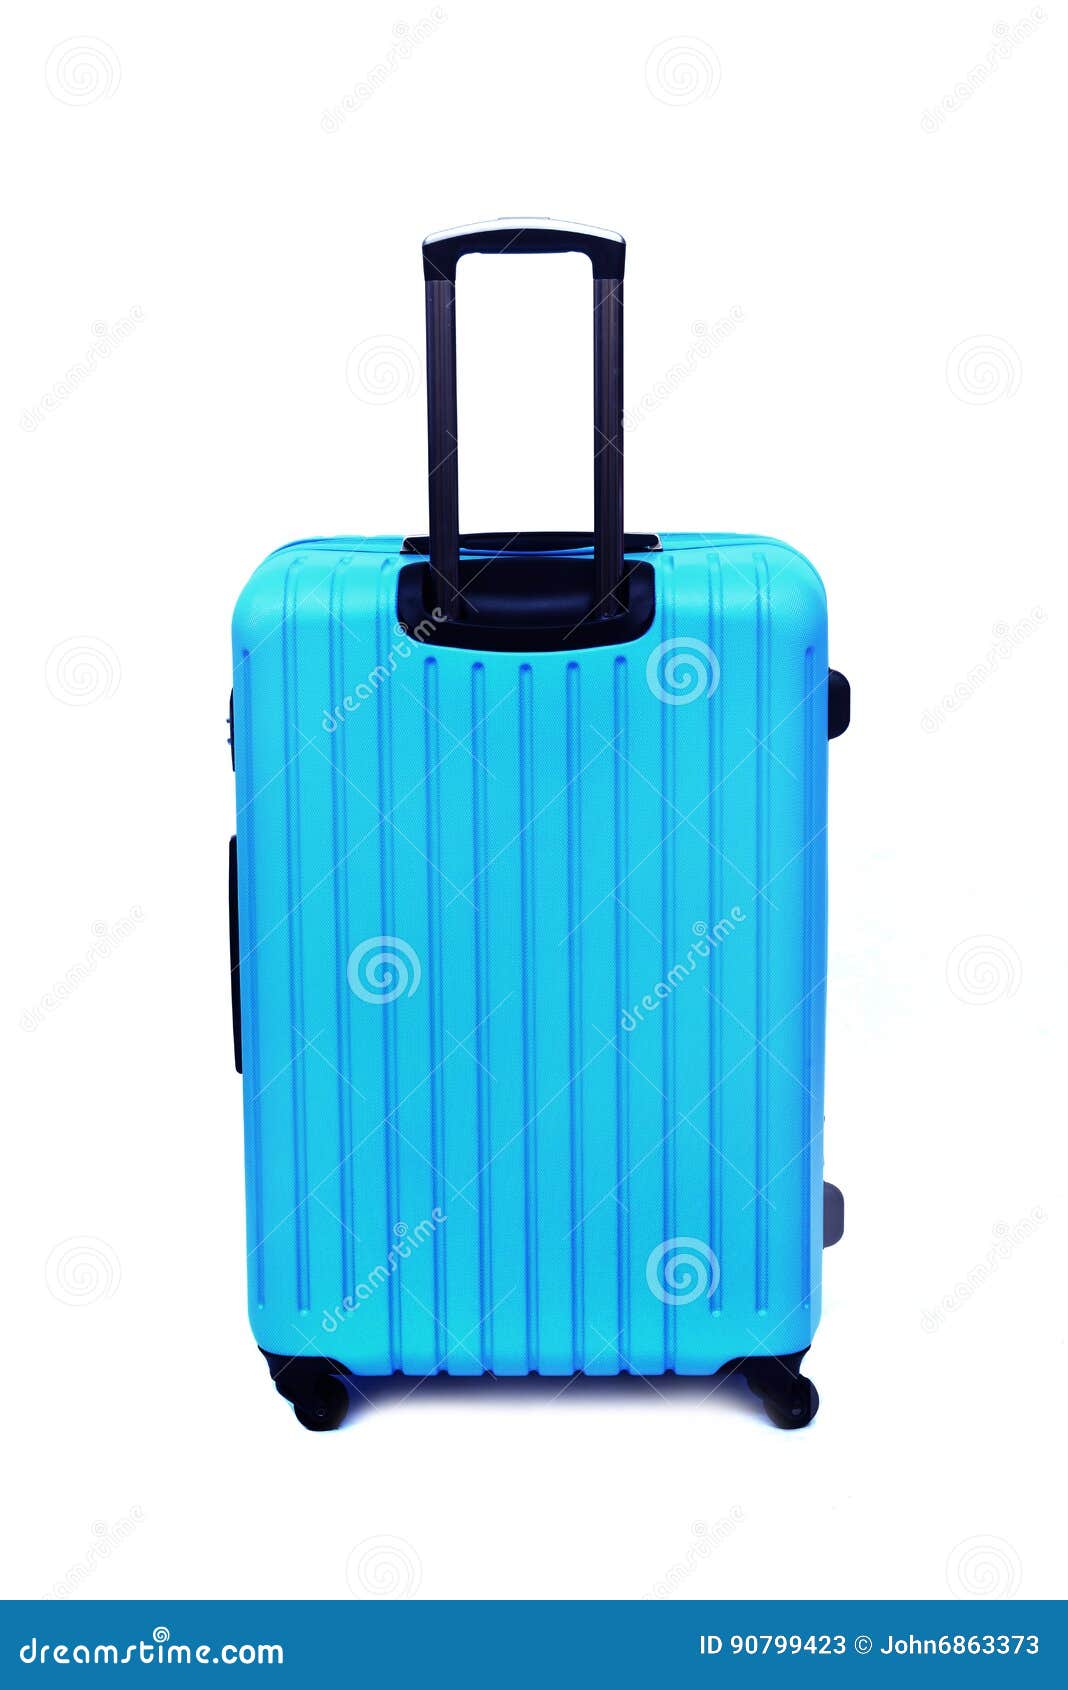 Blue luggage isolated stock image. Image of holiday, airport - 90799423